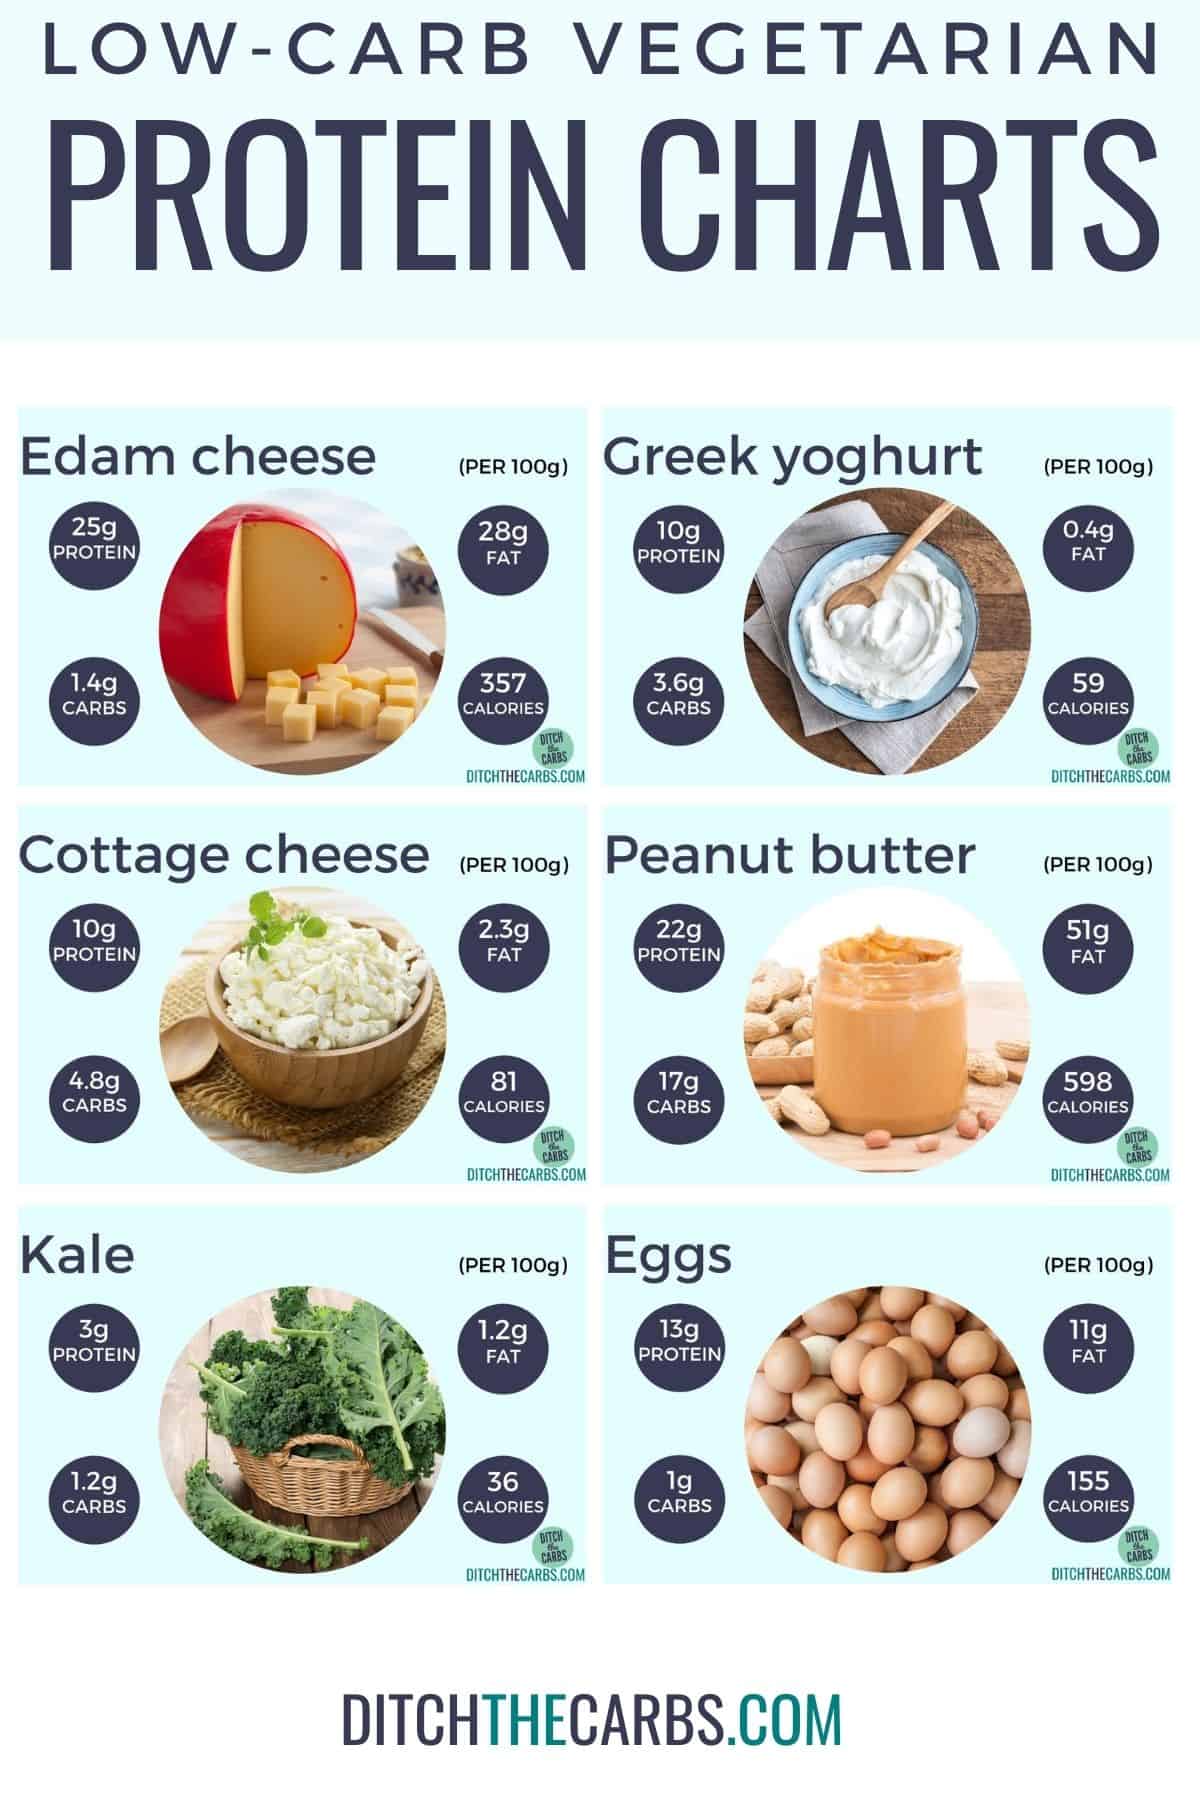 10 High-Protein Low-Carb Vegetarian Foods (Protein Charts) + 31 recipes